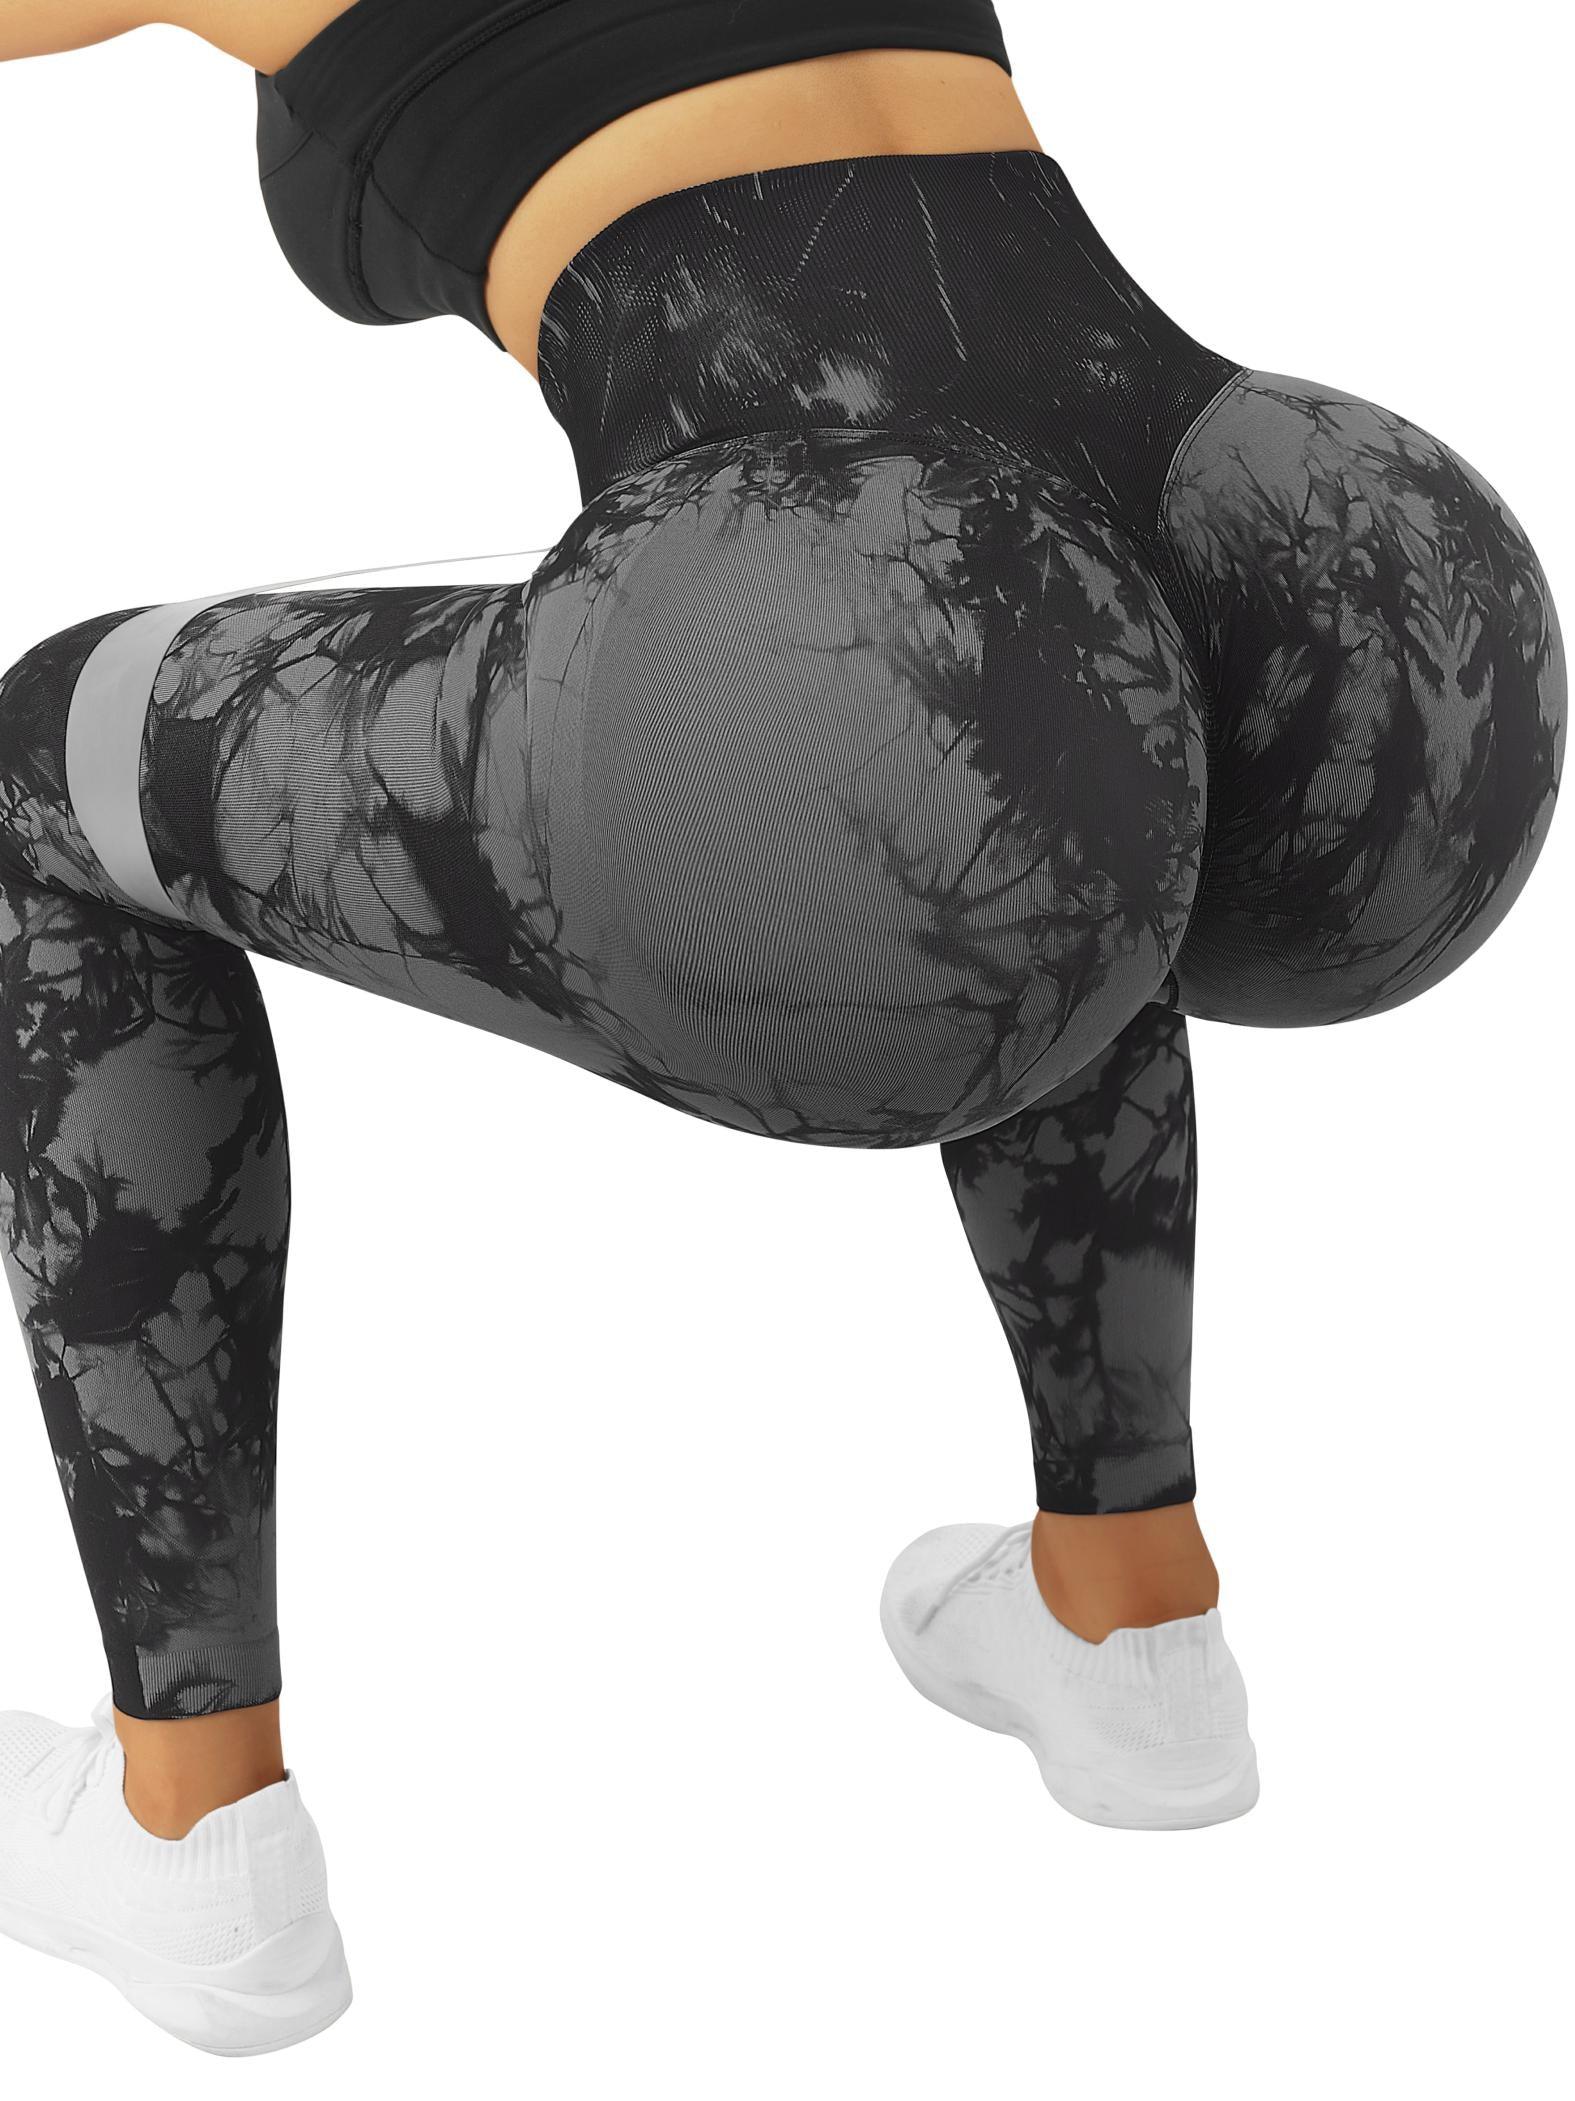 Le Nakai Sexy Seamless Yoga Leggings For Women Big Booty Gym Pants Arise  Scrunch Legging Workout Tights Athletic Wear